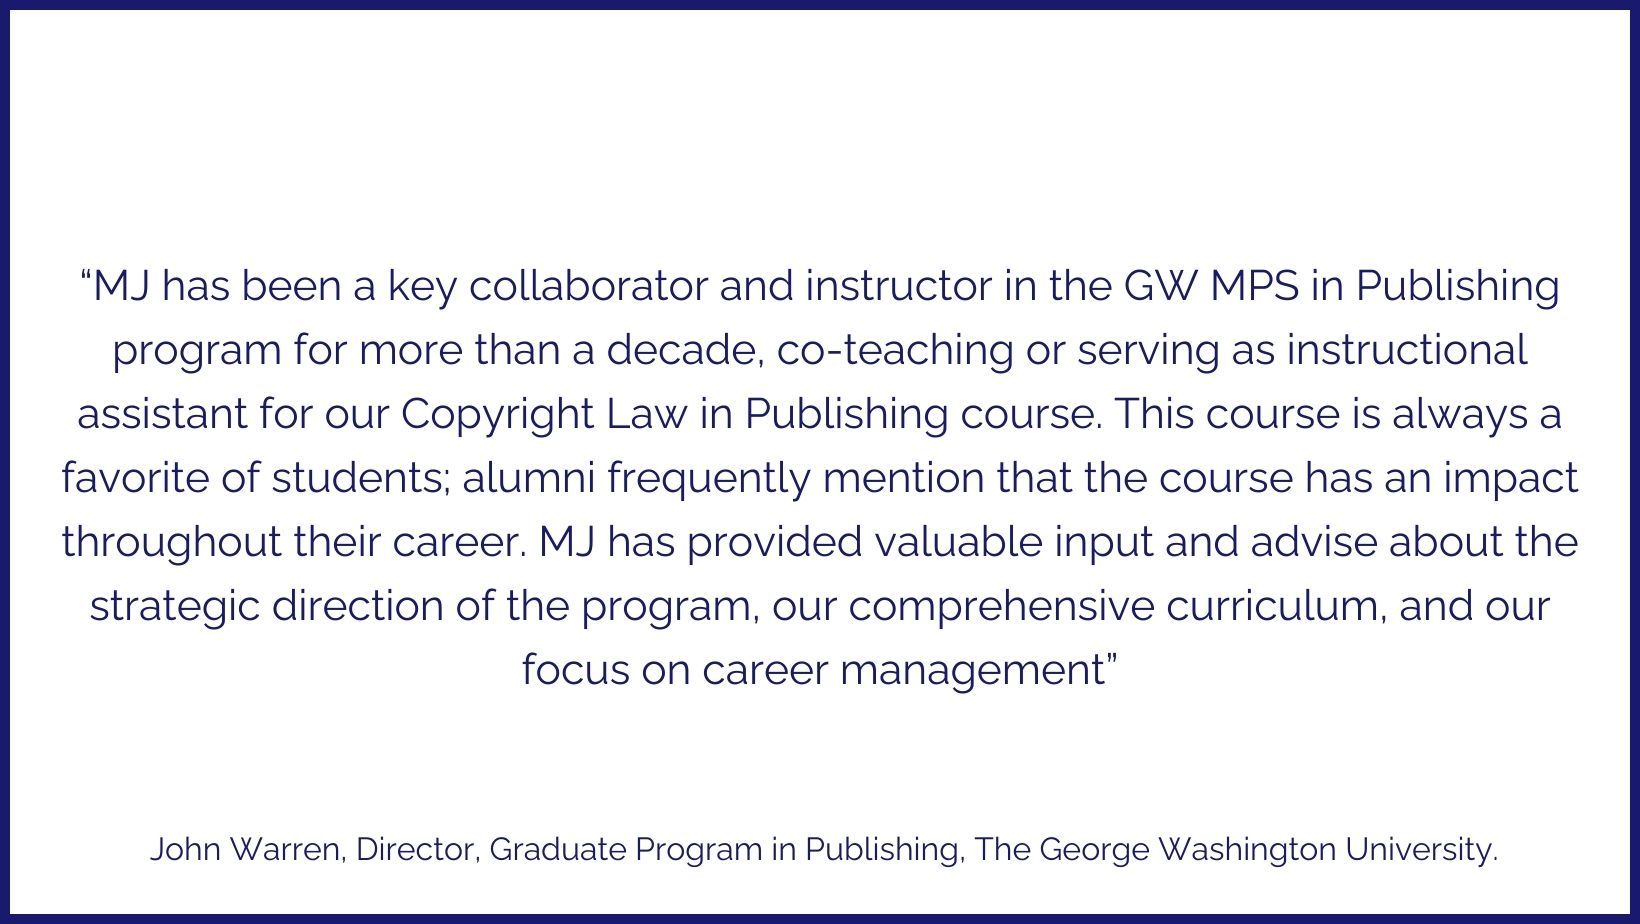 Testimonial: “MJ has been a key collaborator and instructor in the GW MPS in Publishing program for more than a decade, co-teaching or serving as instructional assistant for our Copyright Law in Publishing course. This course is always a favorite of students; alumni frequently mention that the course has an impact throughout their career. MJ has provided valuable input and advise about the strategic direction of the program, our comprehensive curriculum, and our focus on career management” - John Warren, Director, Graduate Program in Publishing, The George Washington University.